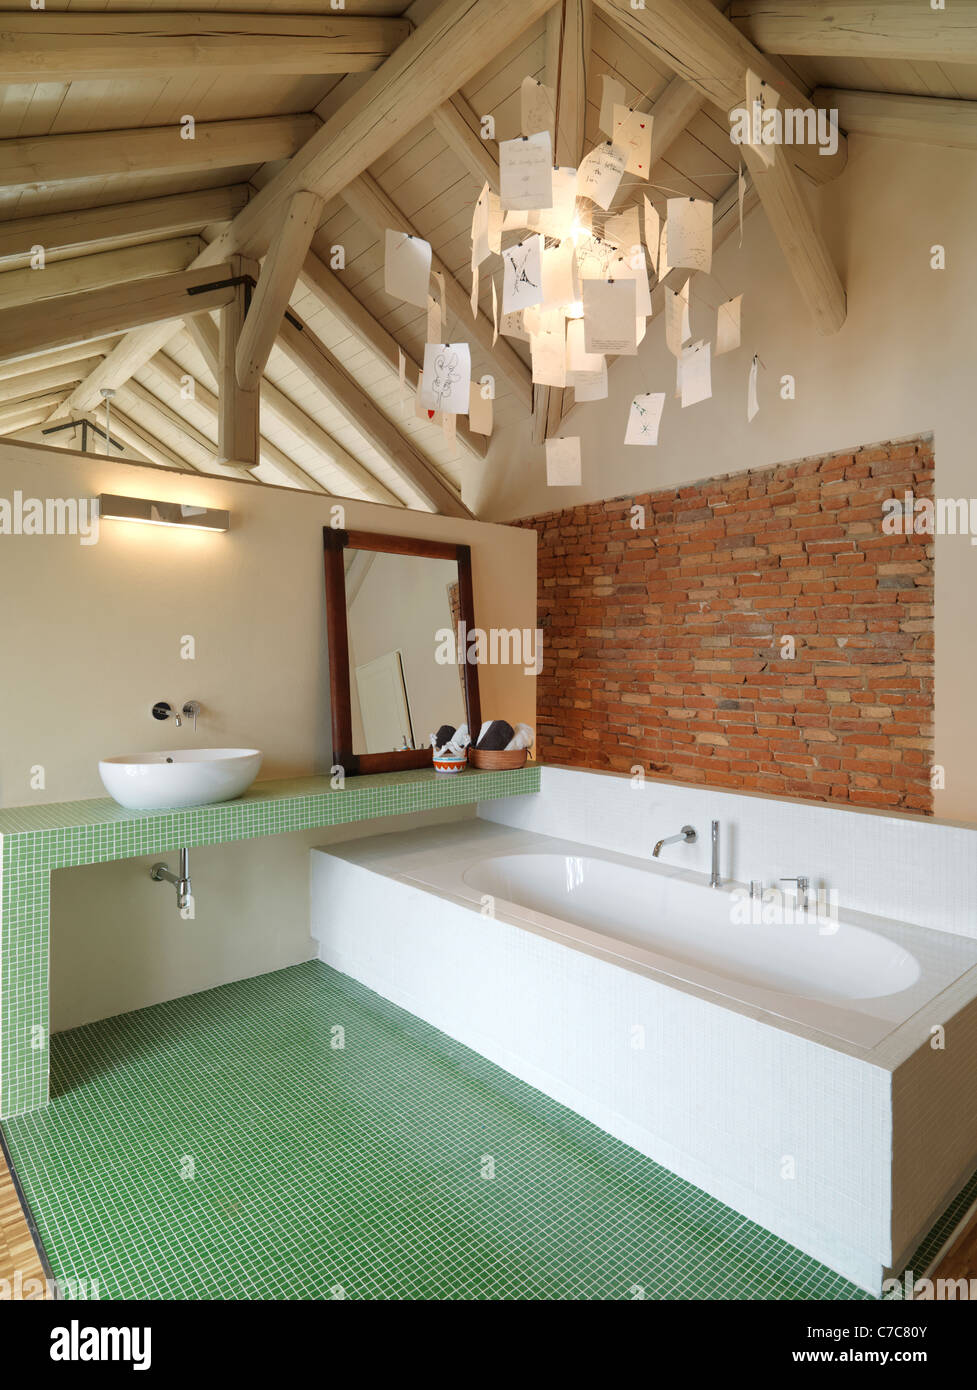 modern bathroom in the attic with wood ceiling and brick wall Stock Photo